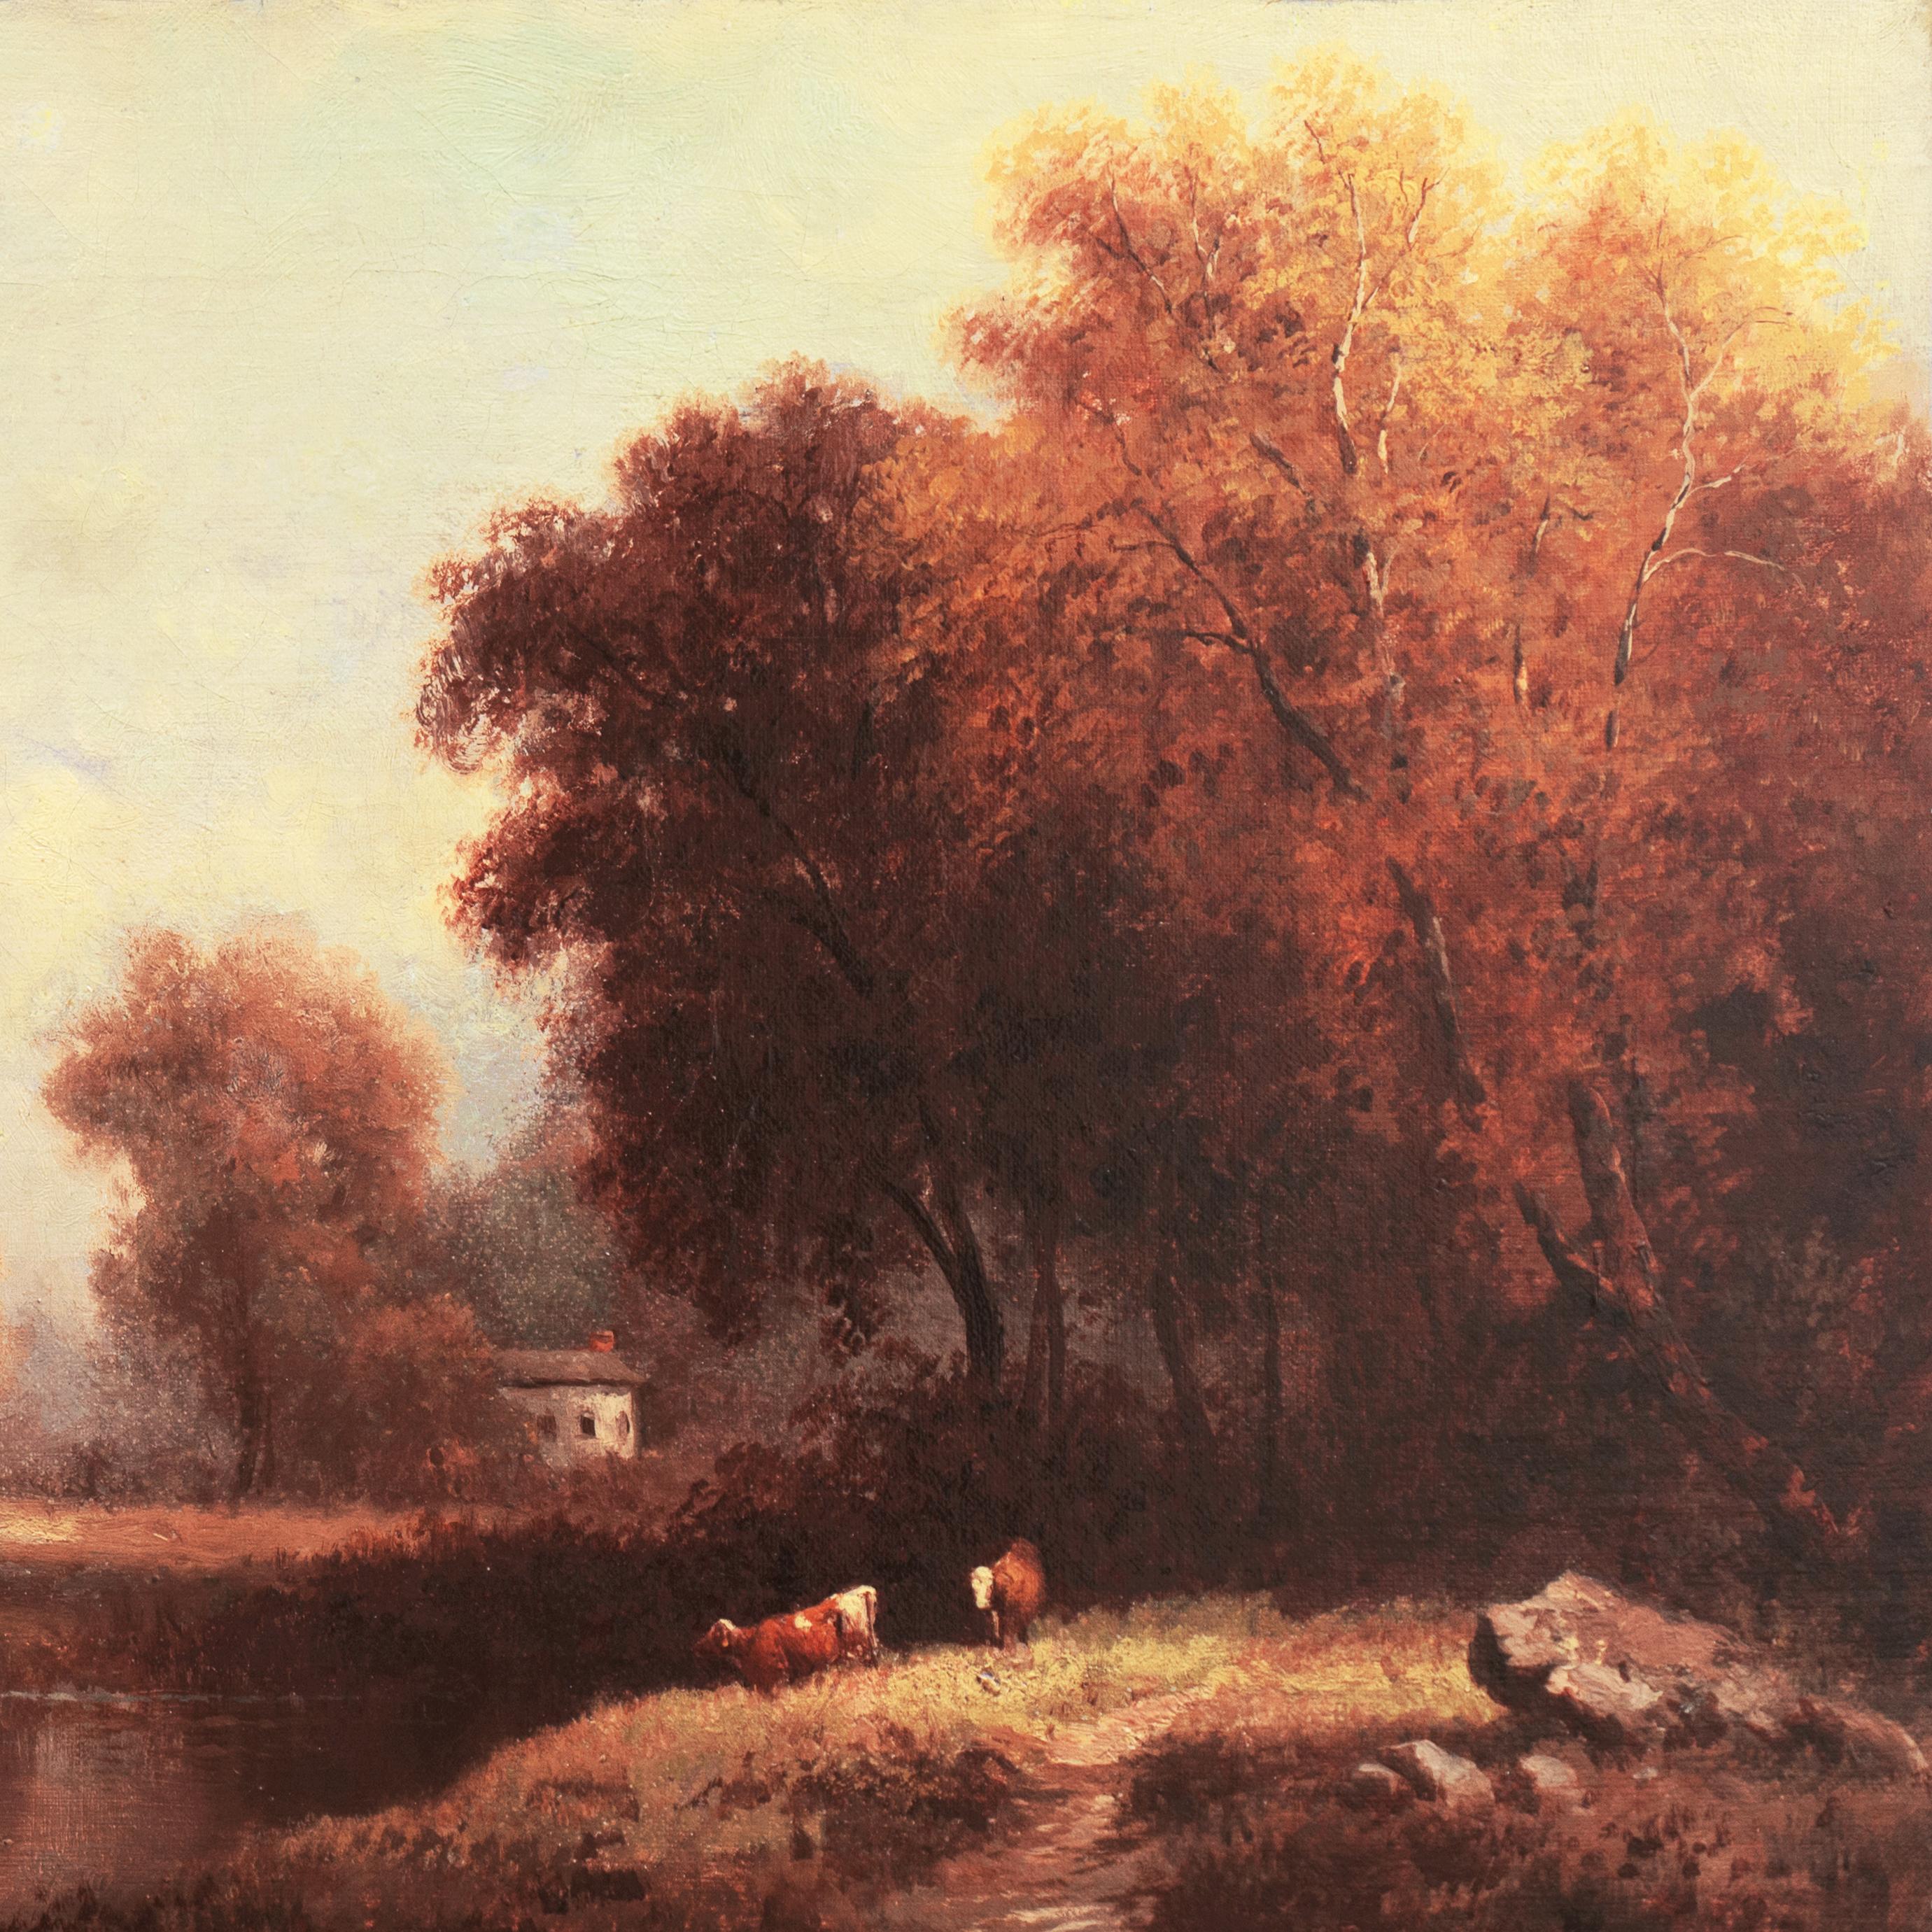 French School, indistinctly signed, lower right, and painted circa 1870.

A fine and atmospheric, late 19th-century river landscape showing an expansive, yet meditative, view of cows grazing beside a peaceful riverbank with a figure on the far shore